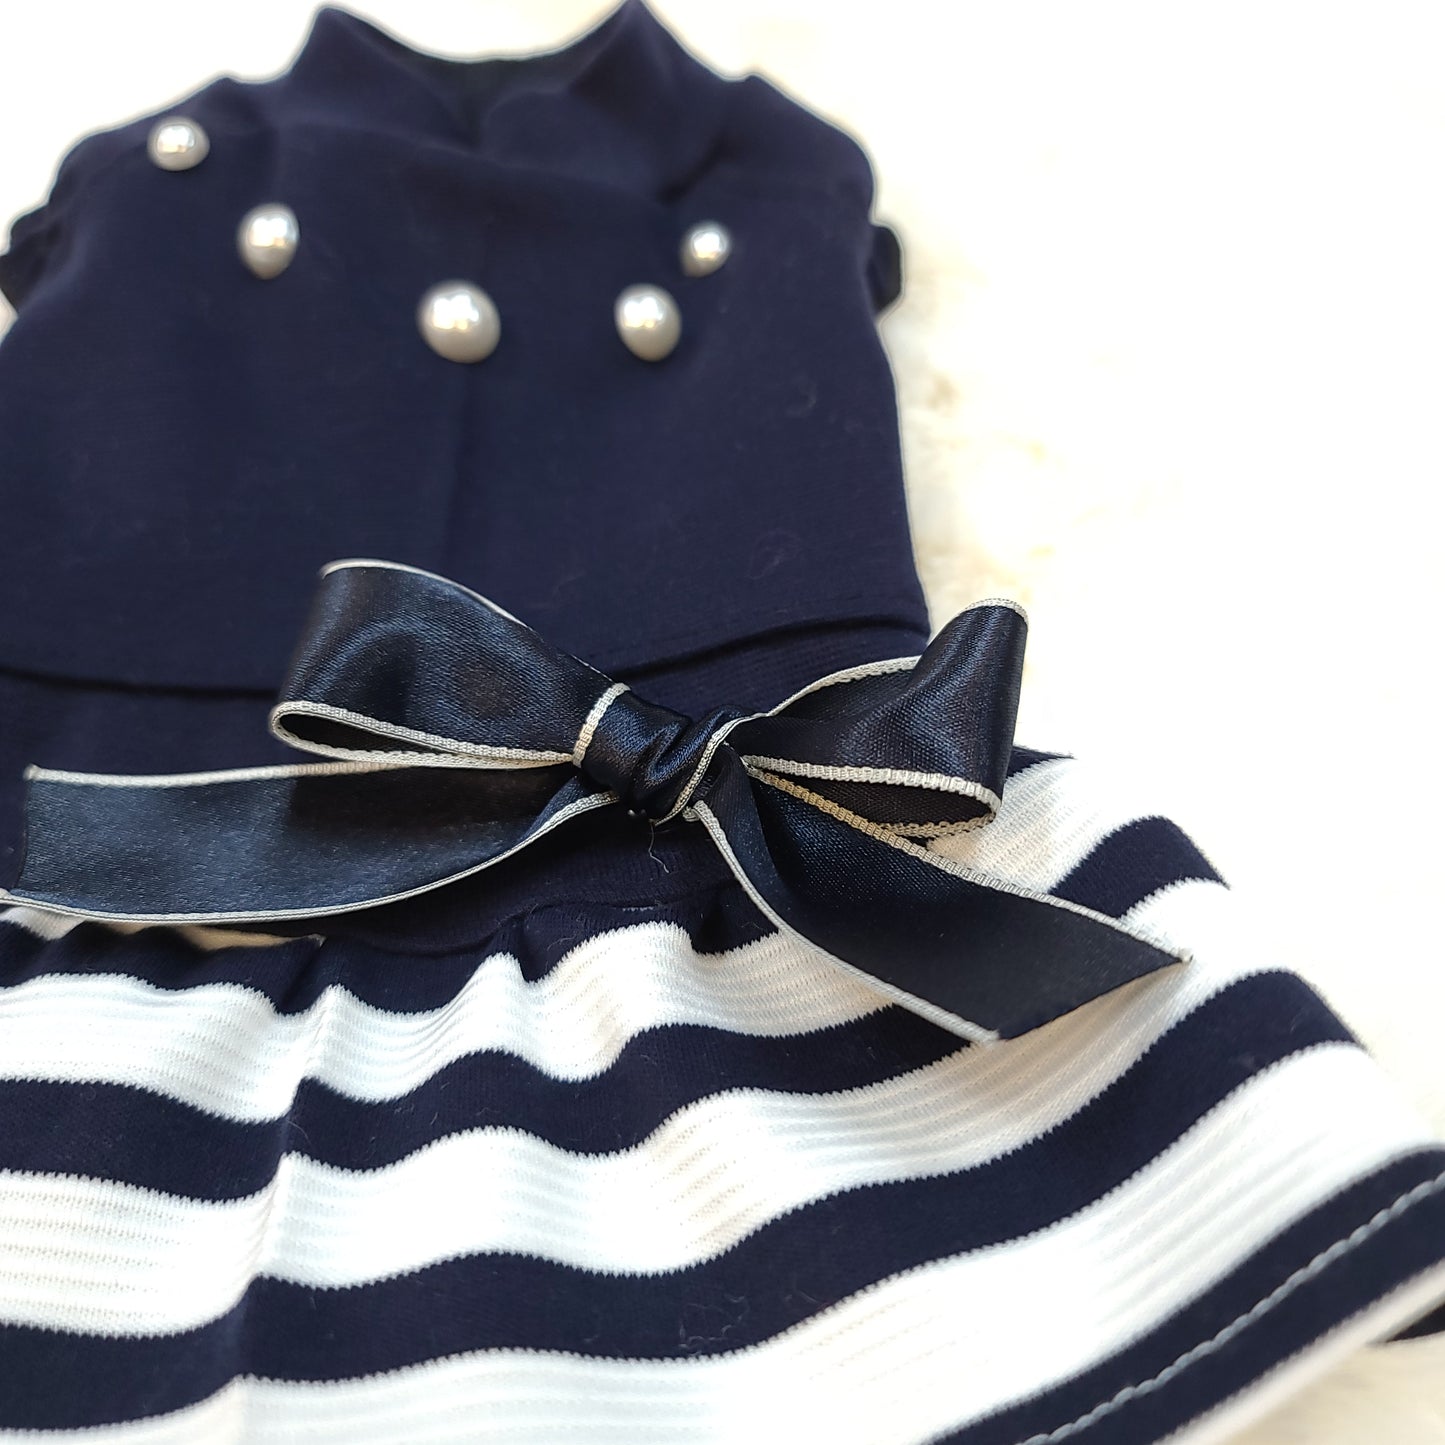 Pearls Bows Striped Party Dress